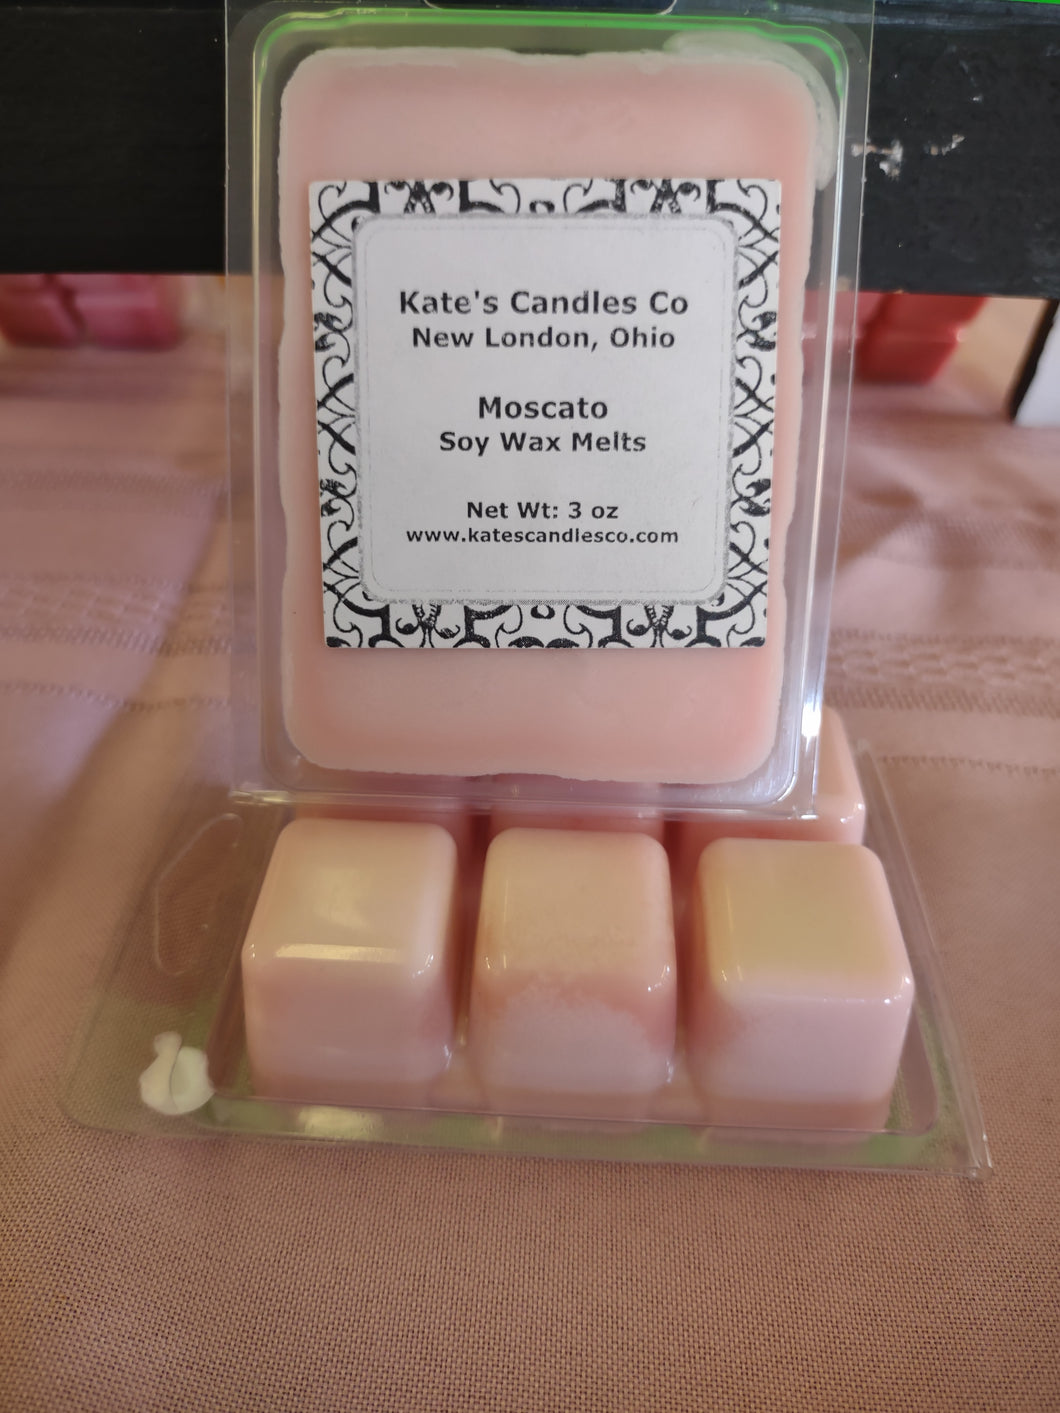 Moscato Soy Wax Melts - Kate's Candles Co.